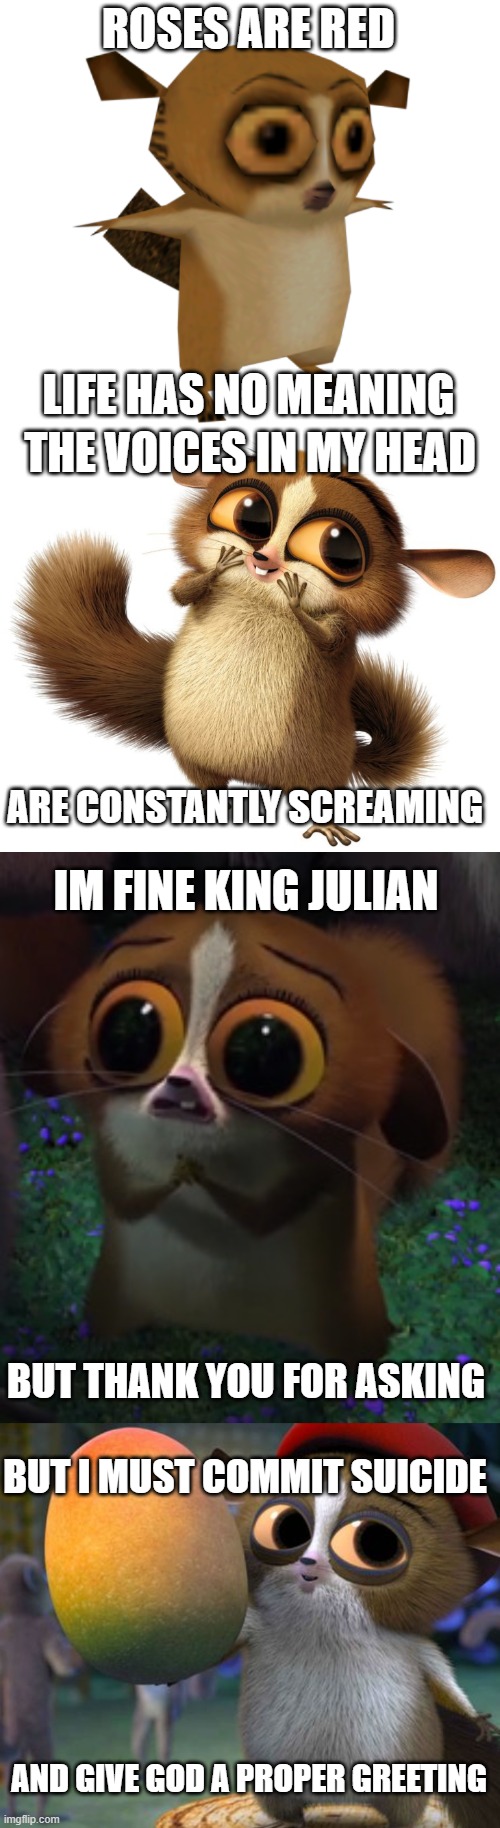 Mort. | ROSES ARE RED; LIFE HAS NO MEANING; THE VOICES IN MY HEAD; ARE CONSTANTLY SCREAMING; IM FINE KING JULIAN; BUT THANK YOU FOR ASKING; BUT I MUST COMMIT SUICIDE; AND GIVE GOD A PROPER GREETING | image tagged in madagascar | made w/ Imgflip meme maker